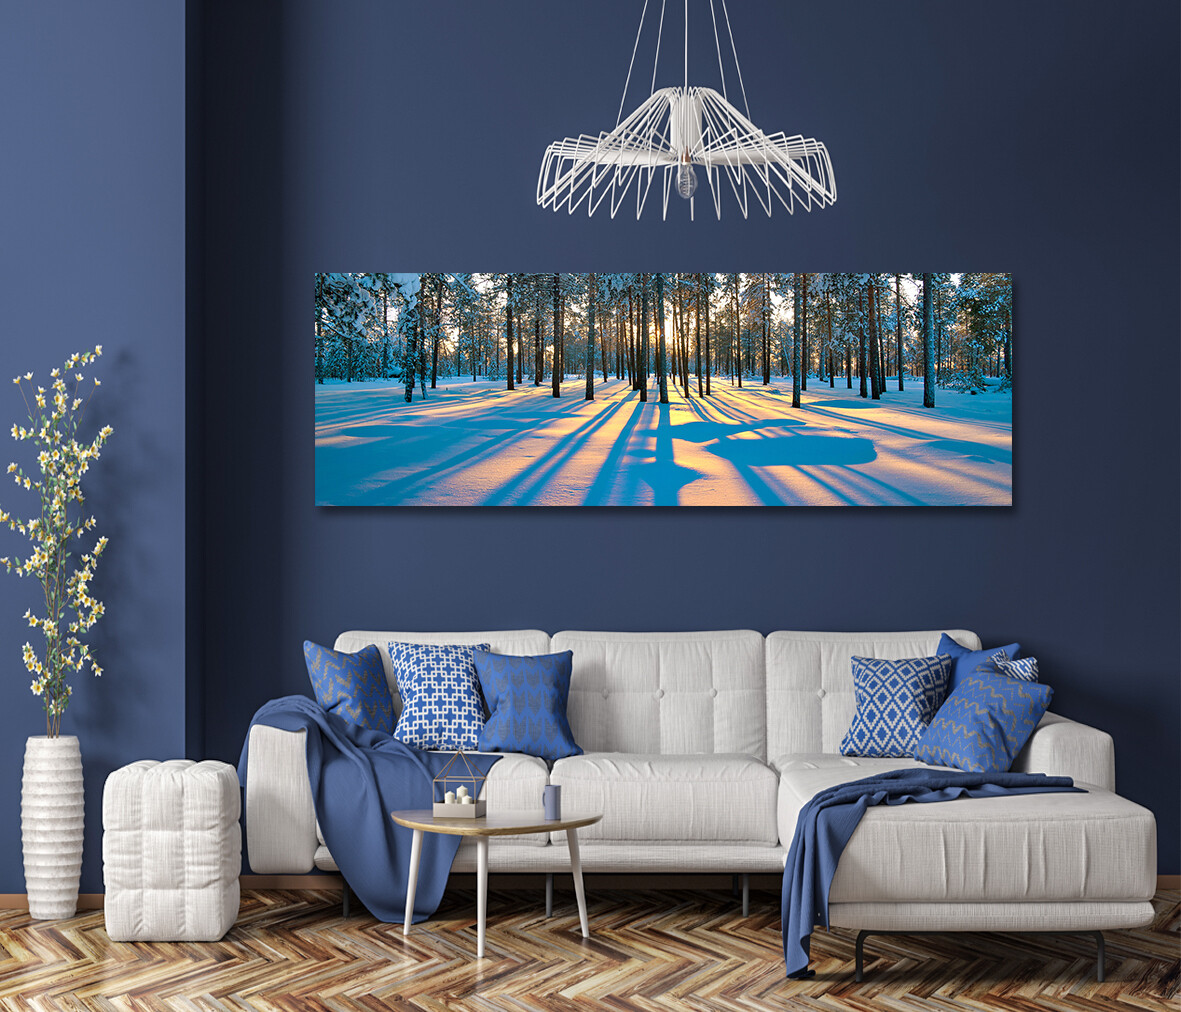 Sunset in a winter forest - Modern Luxury Wall art Printed on Acrylic Glass - Frameless and Ready to Hang